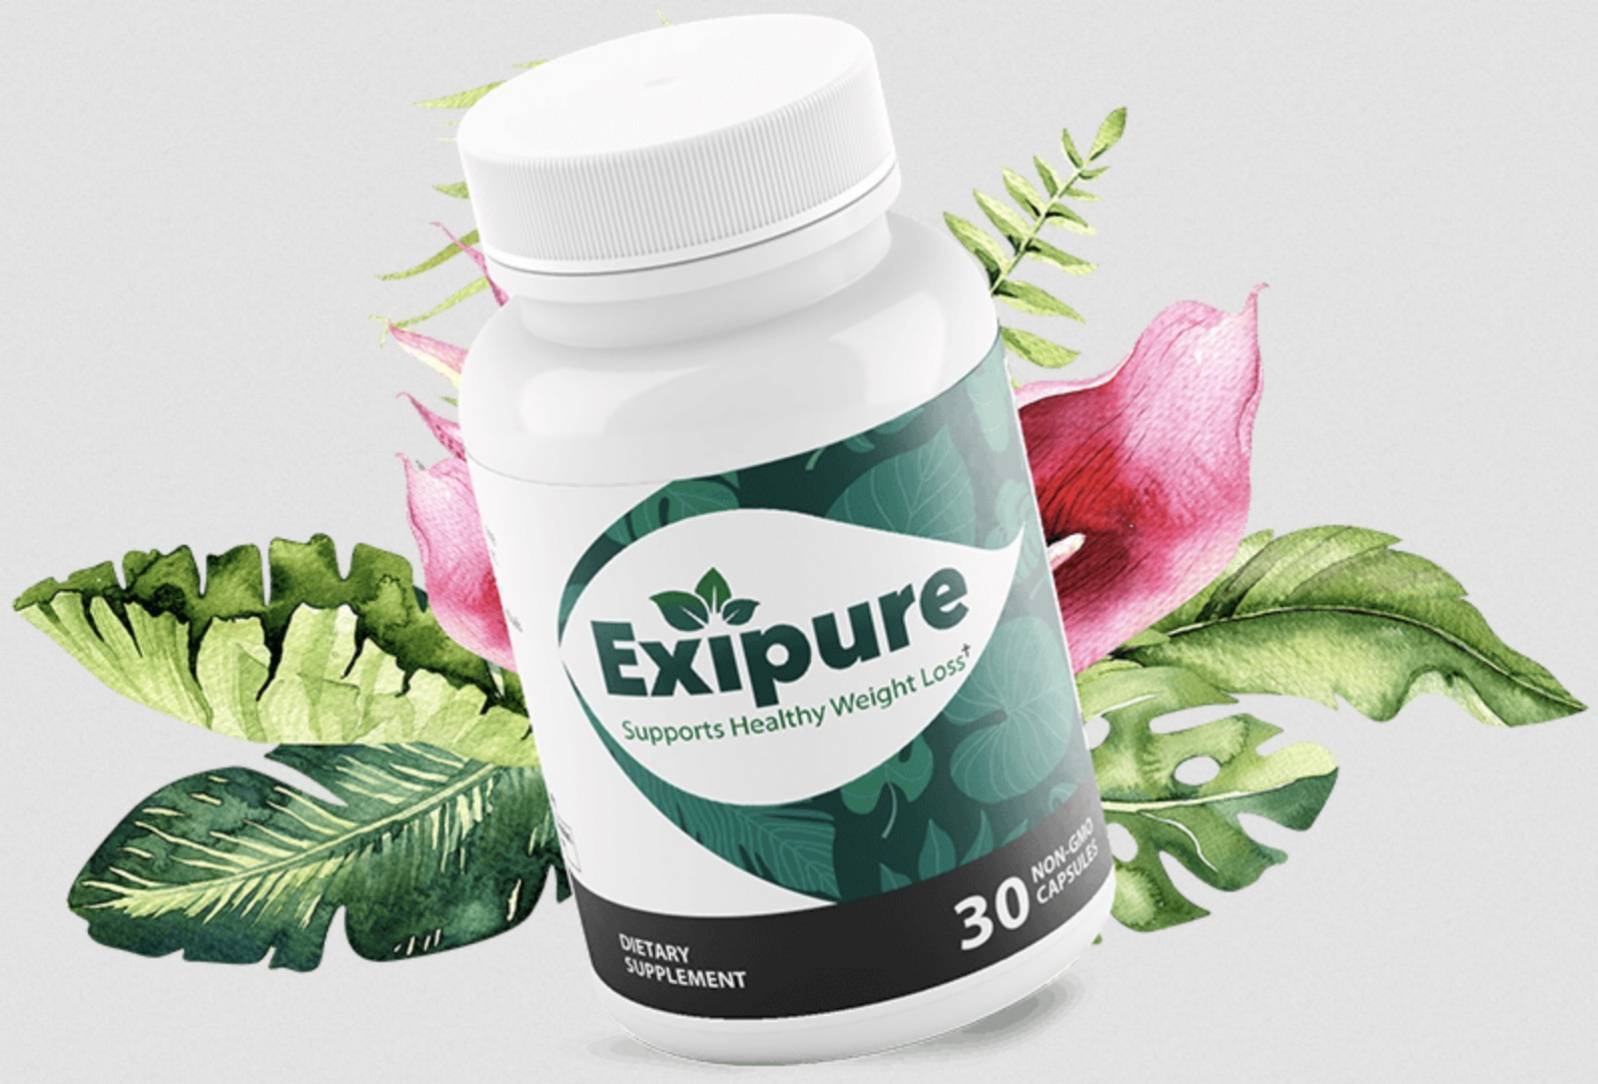 Exipure Product Reviews